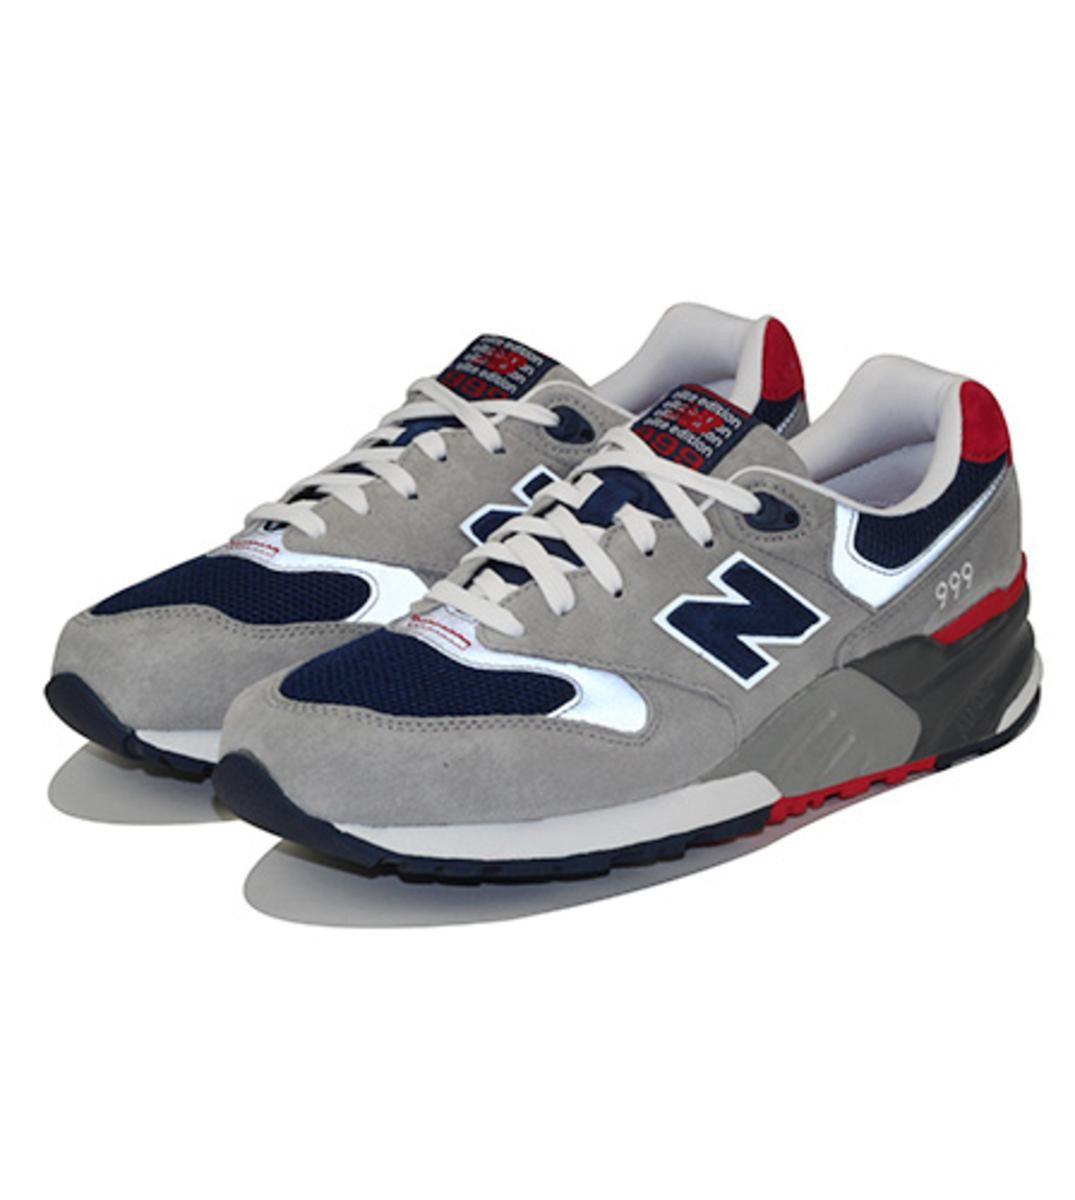 New Balance Rubber 999 Elite Edition Vintage Classics Sneakers in Grey/Navy  (Blue) for Men - Lyst